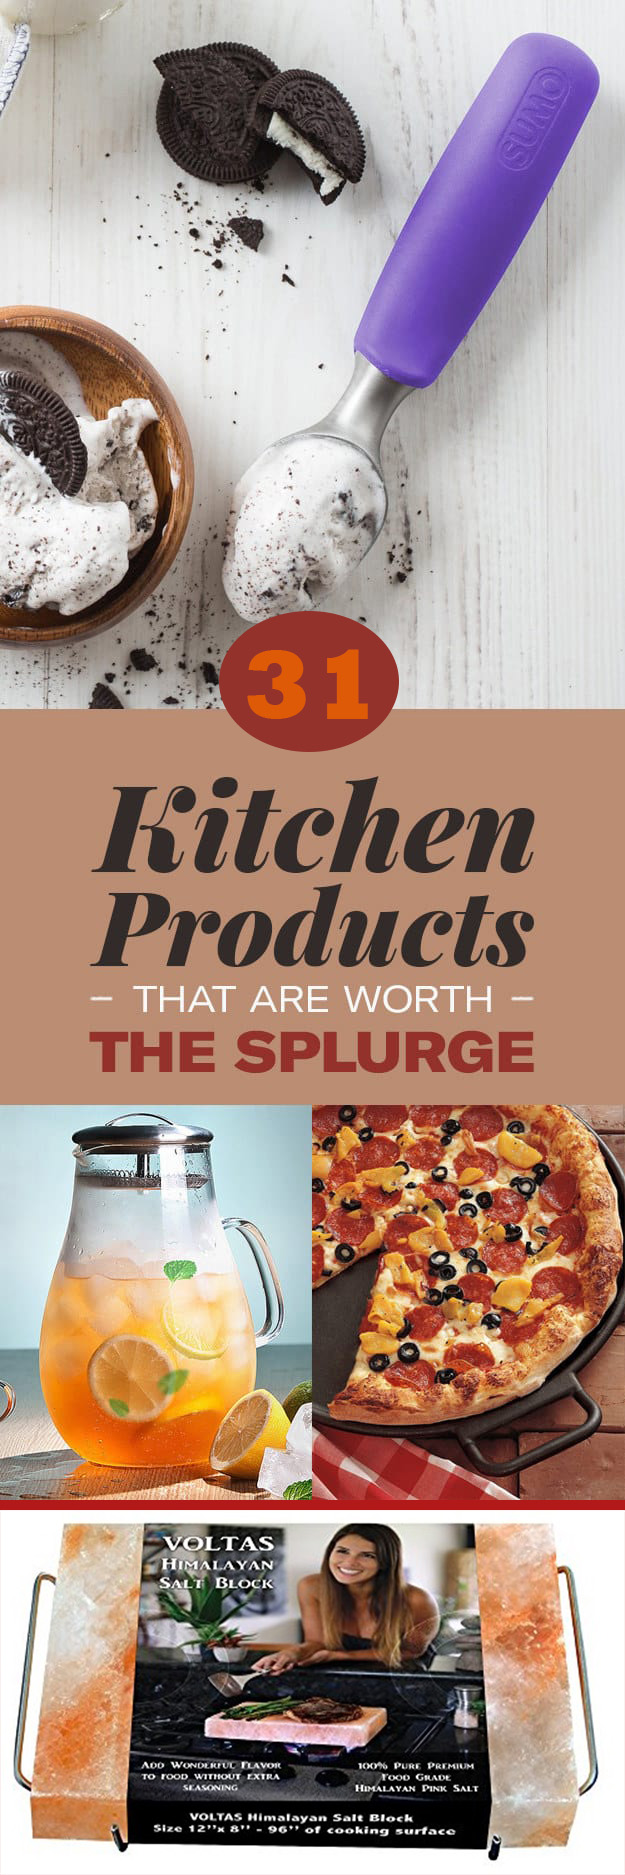 31 Kitchen Products That Are Worth The Splurge